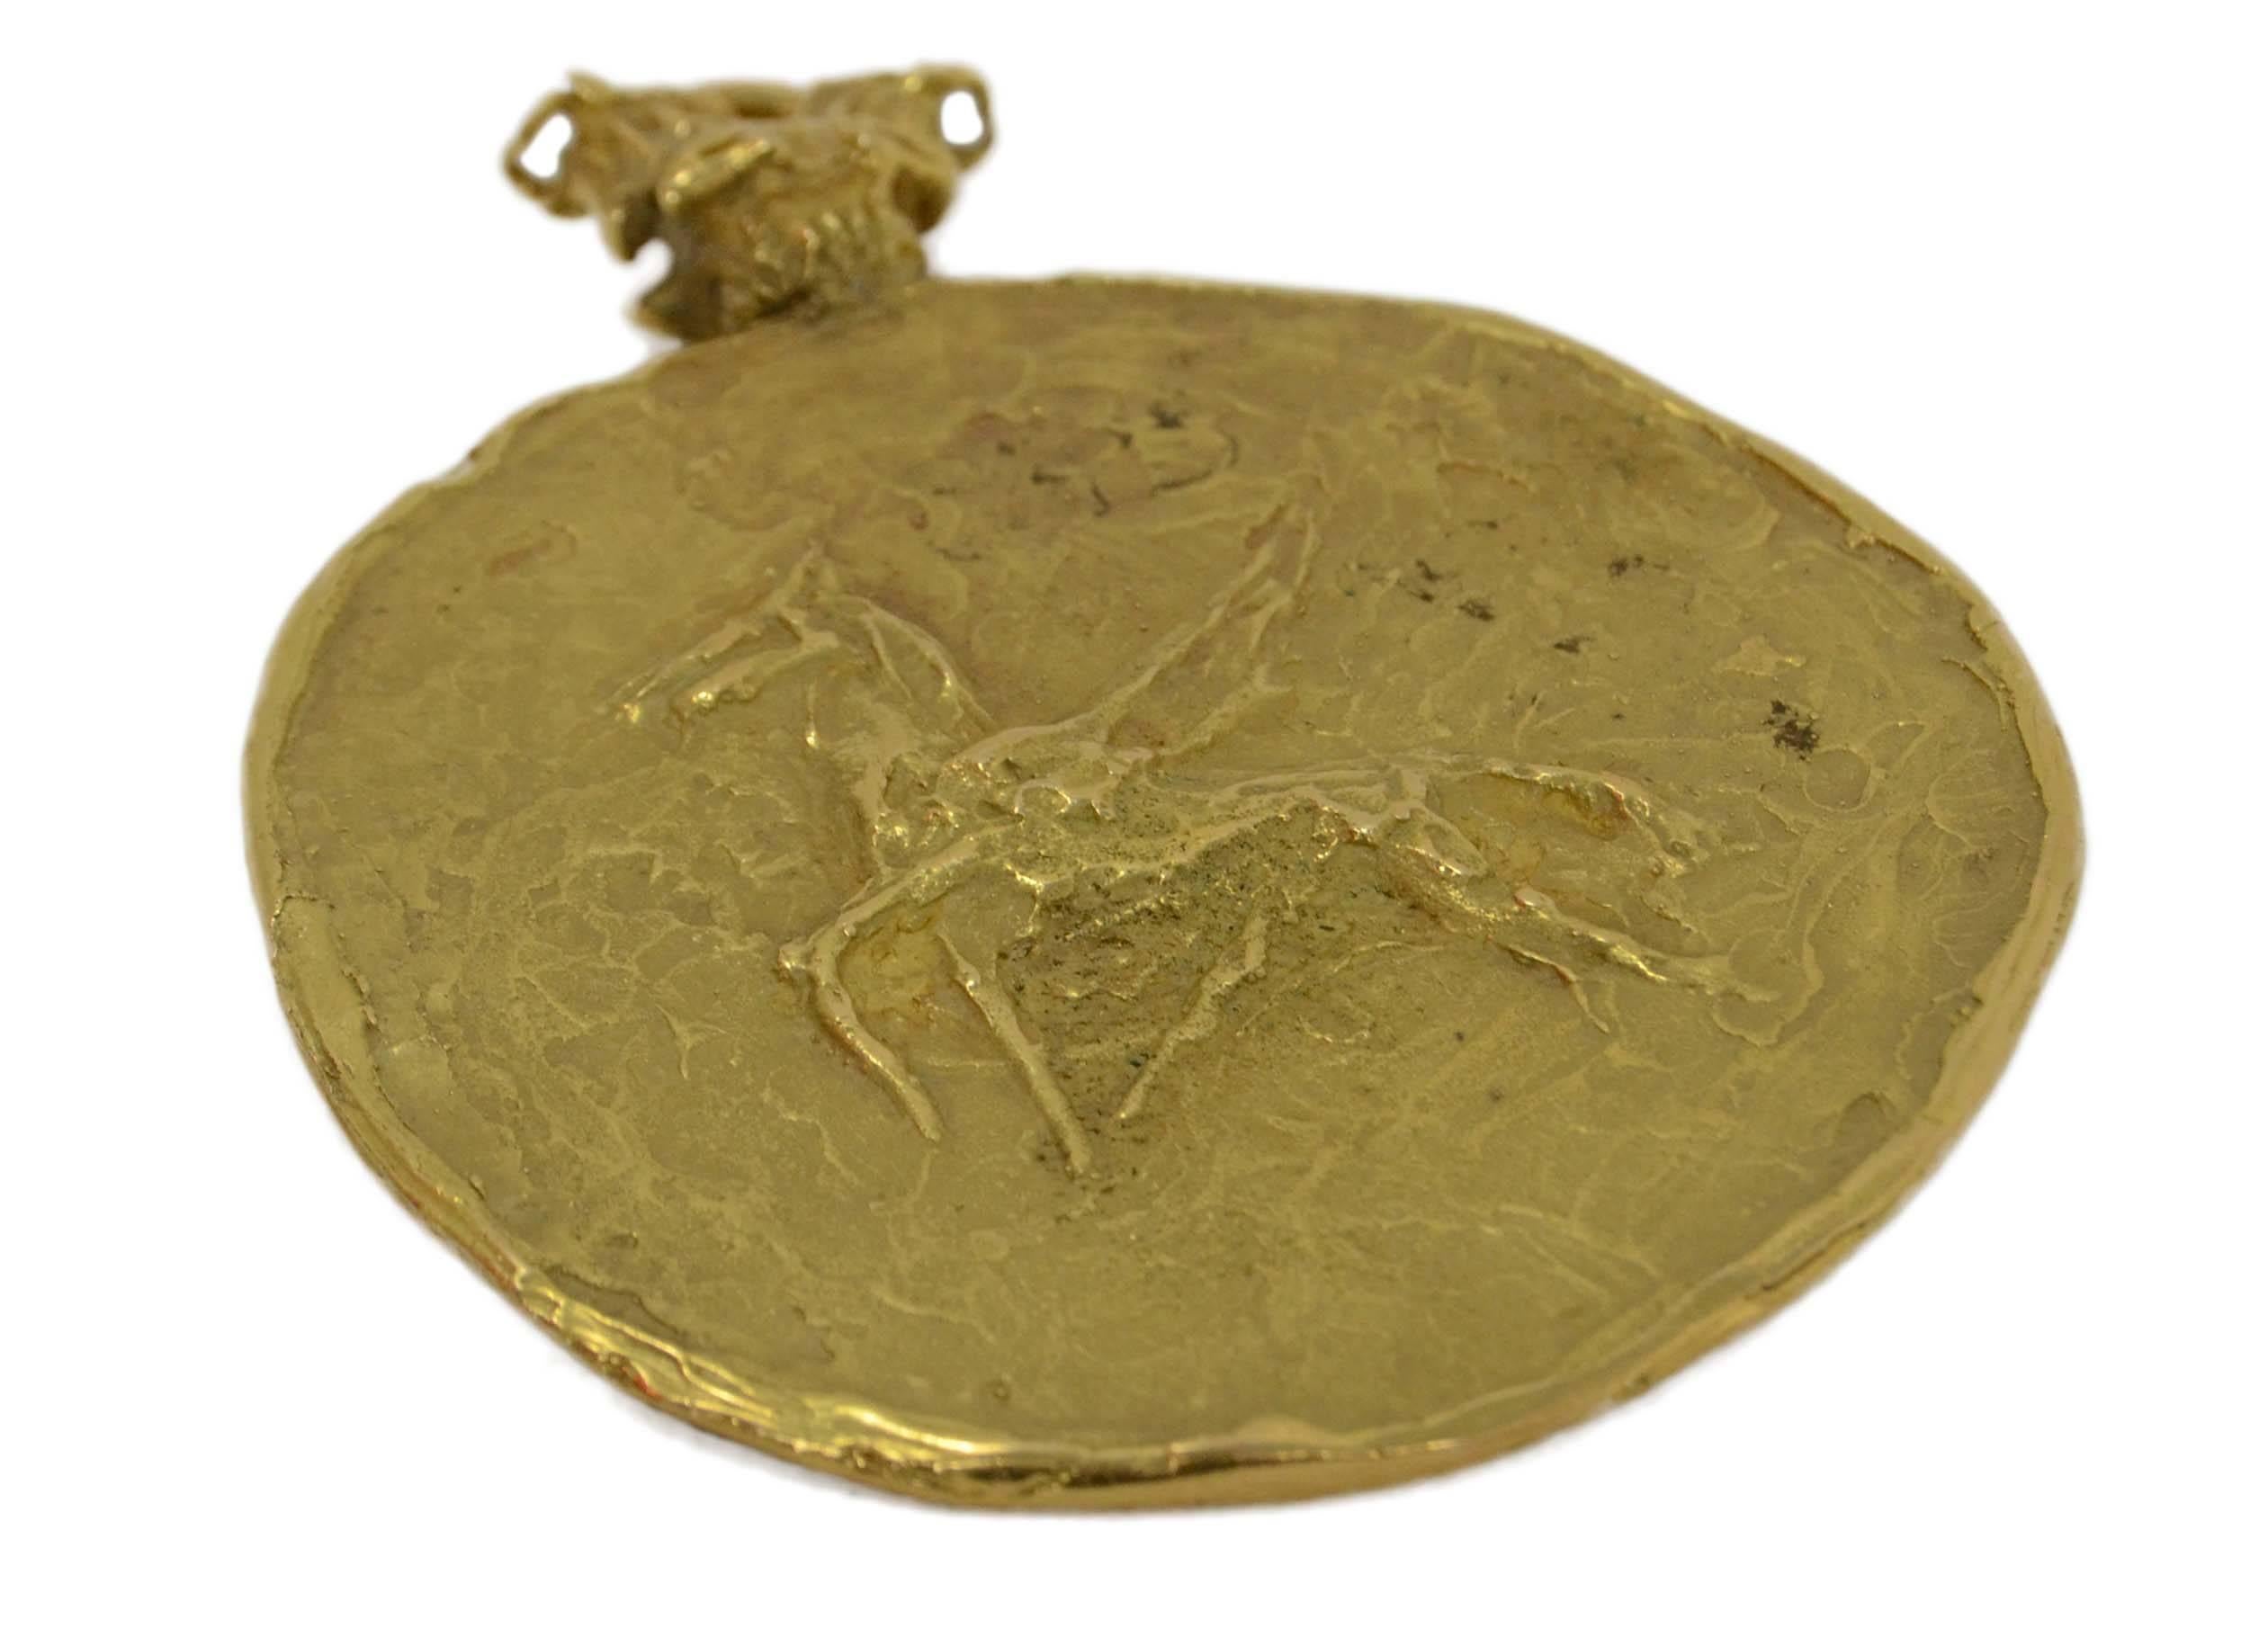 Vintage Hammered Gold Taurus Pendant 
Features Taurus designs on both sides of pendant
Color: Gold
Materials: Metal
Closure: None- has hole at top for hanging on necklace
Overall Condition: Excellent vintage, pre-owned condition
Measurements: